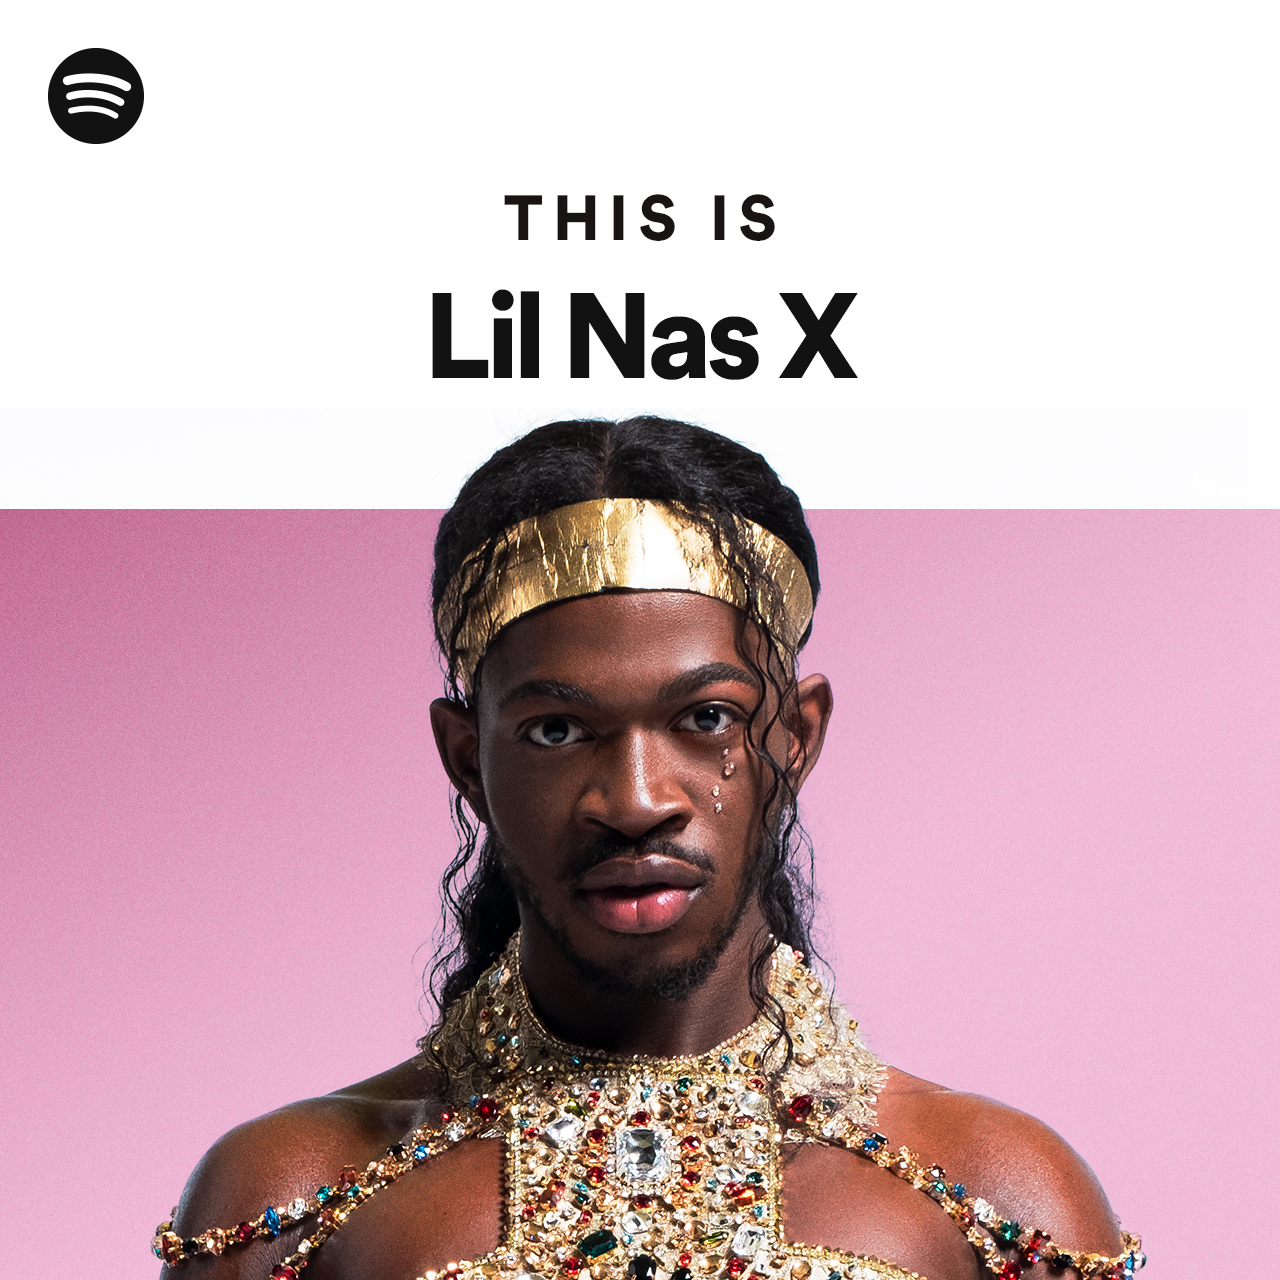 That what i want lil nas x